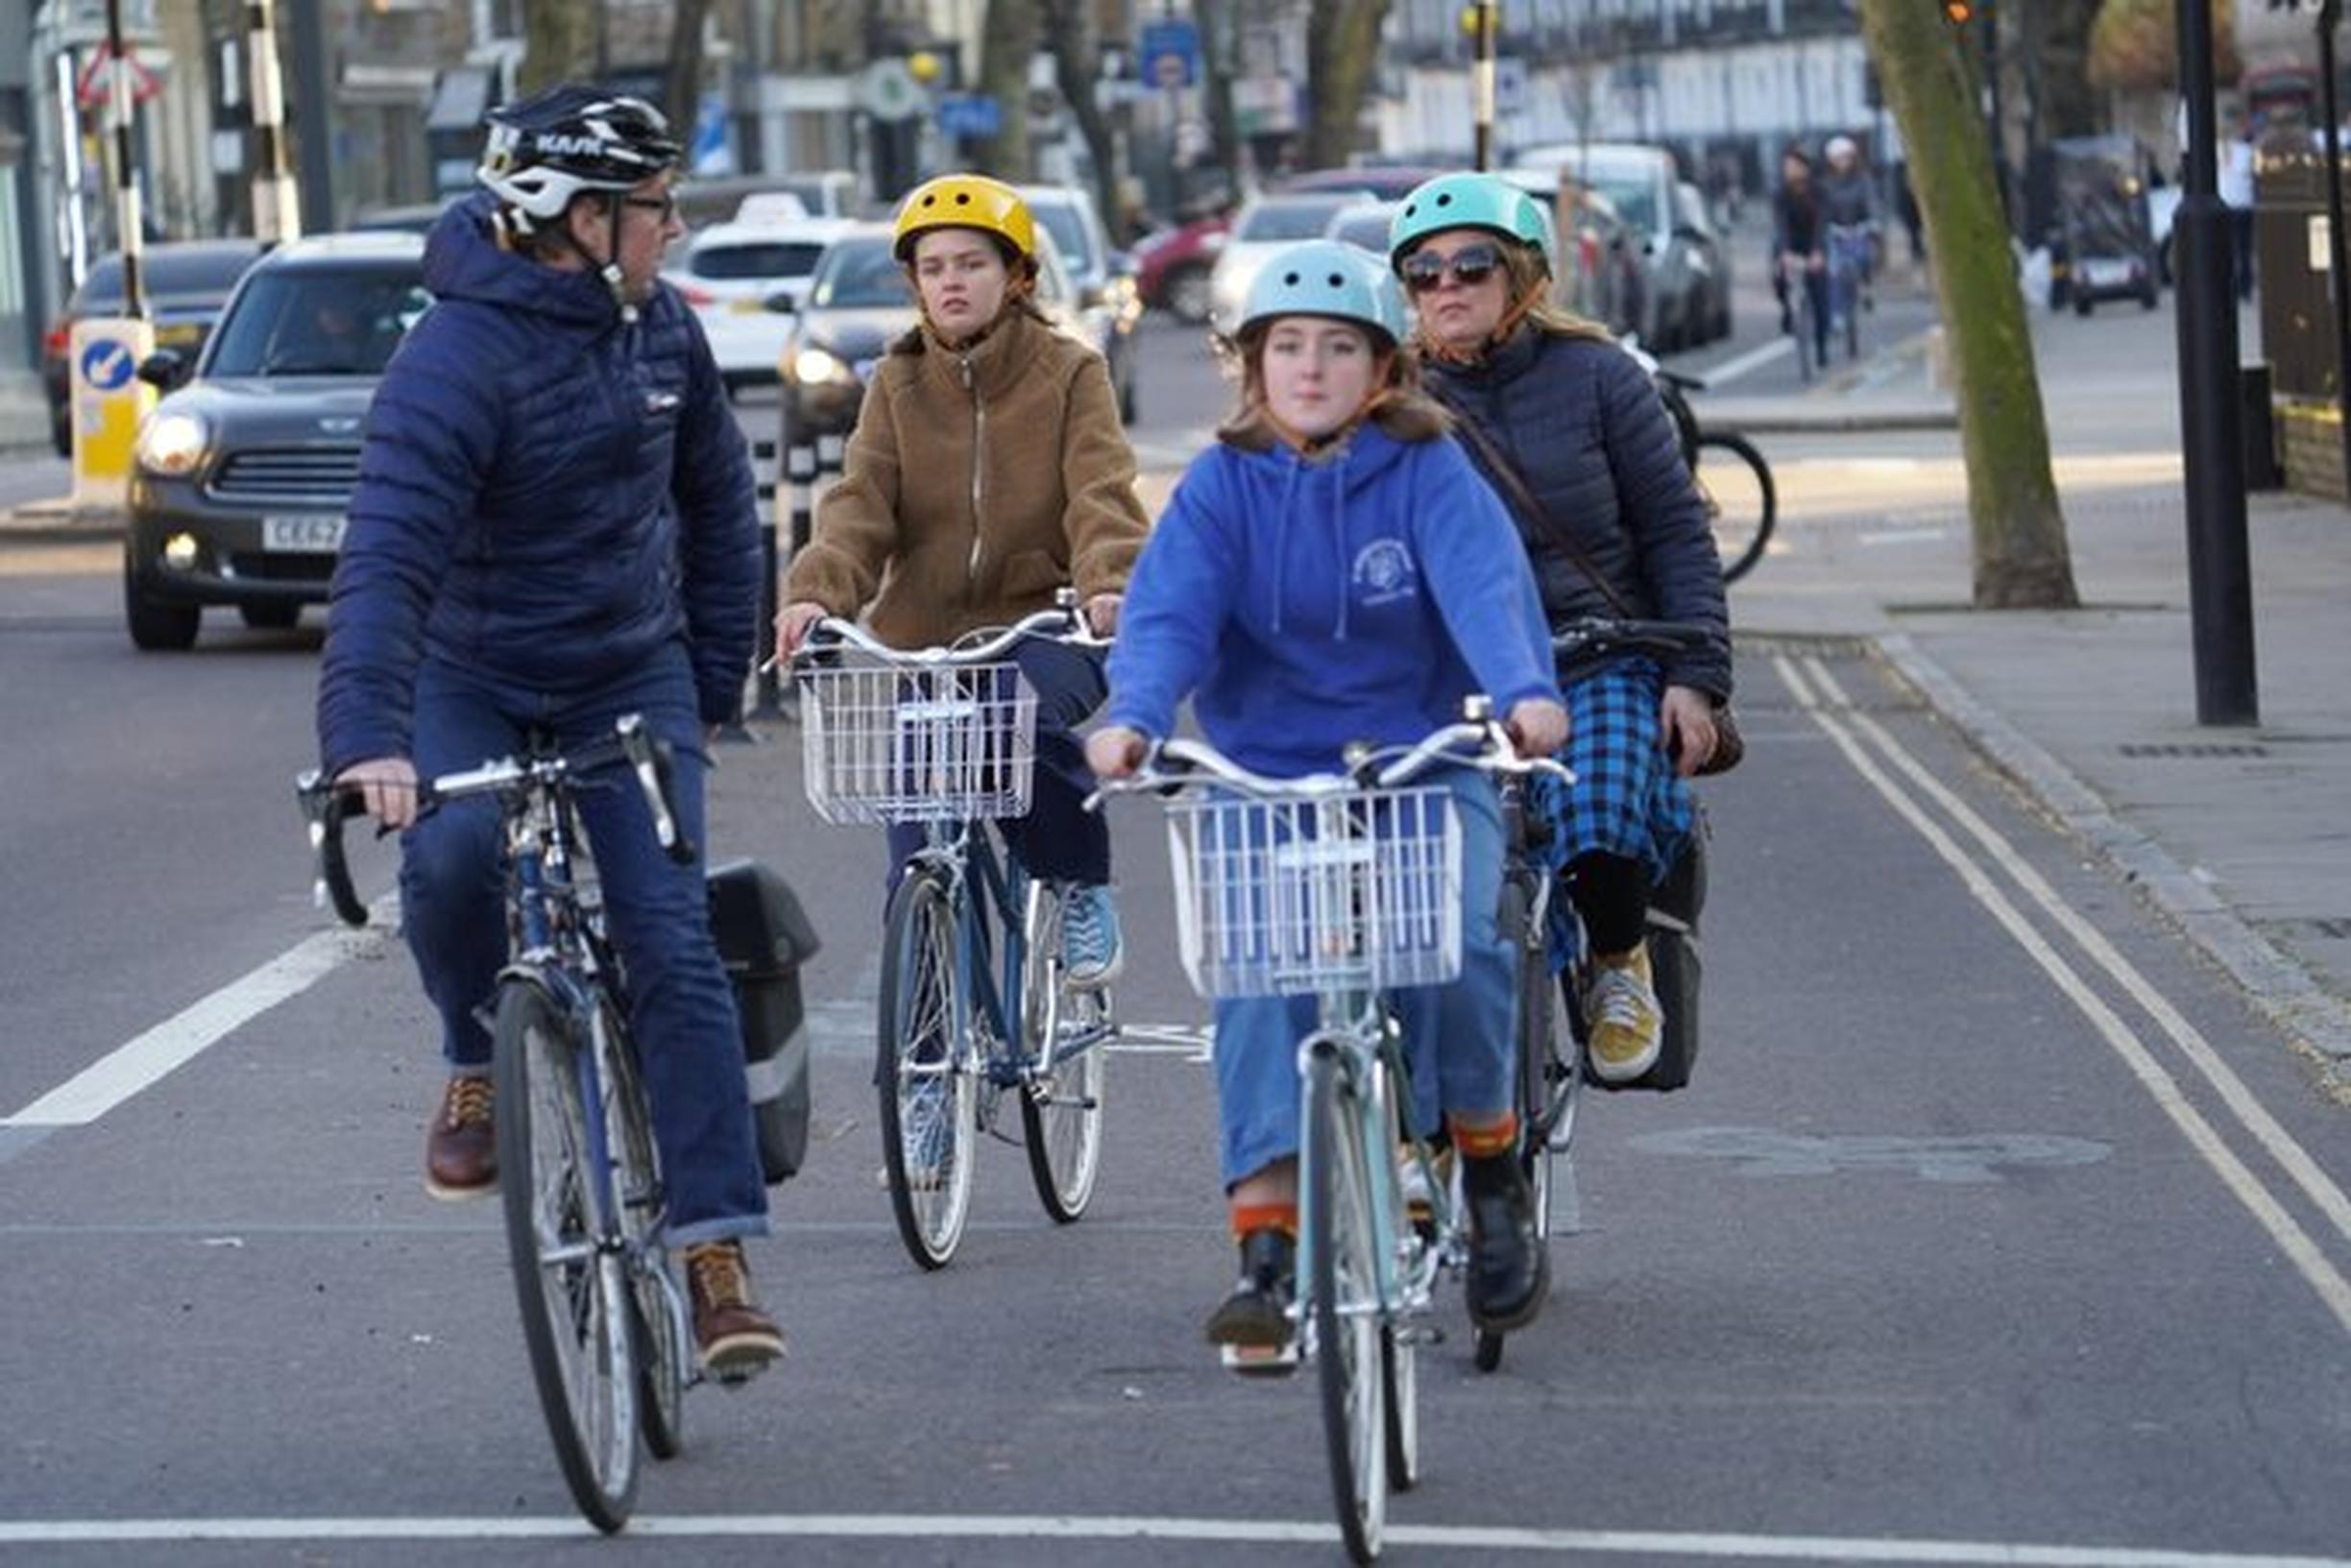 TfL data has regularly shown significant increases in cycling at weekends, with an increase of 240% over the weekend of 26-28 February 2021